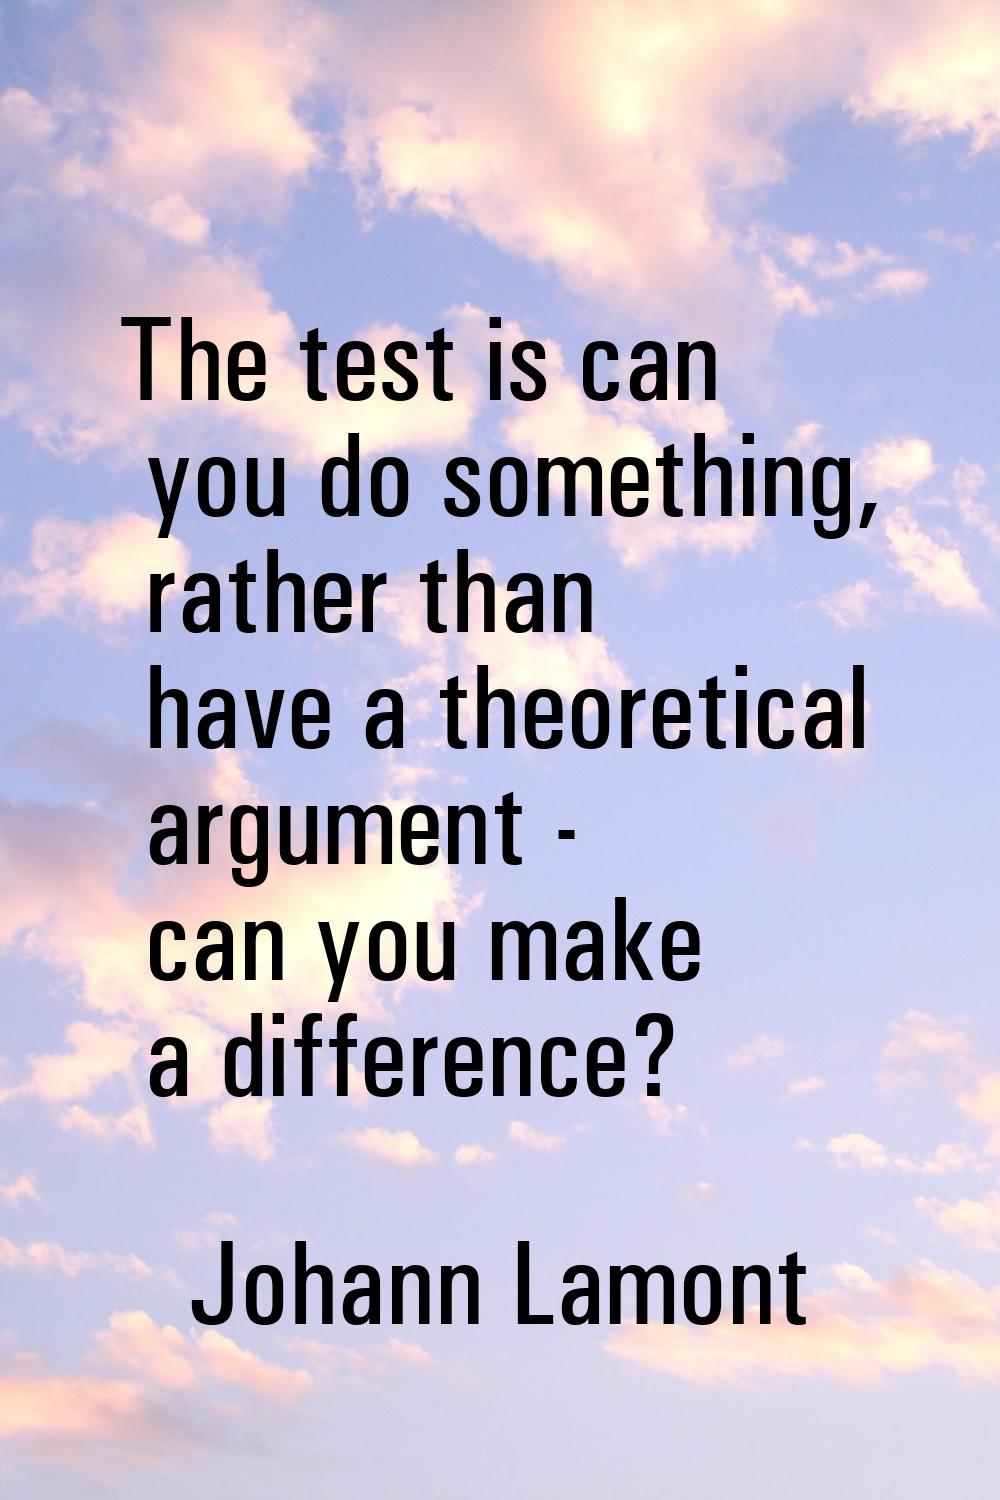 The test is can you do something, rather than have a theoretical argument - can you make a differen